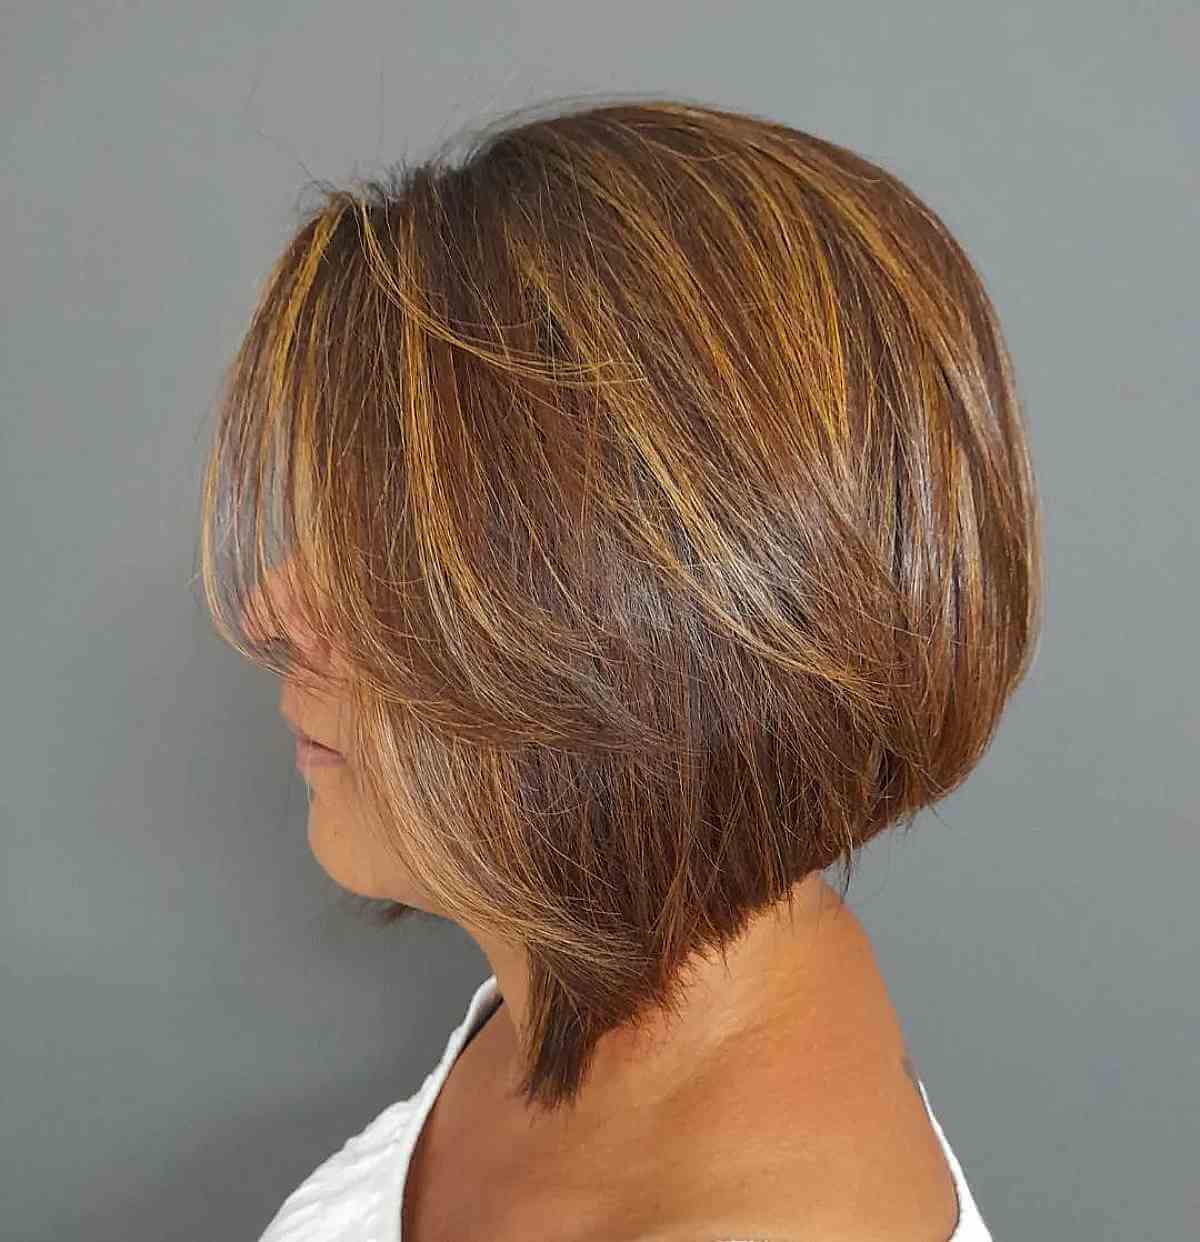 Dimensional Highlights on a Short Bob with Layers